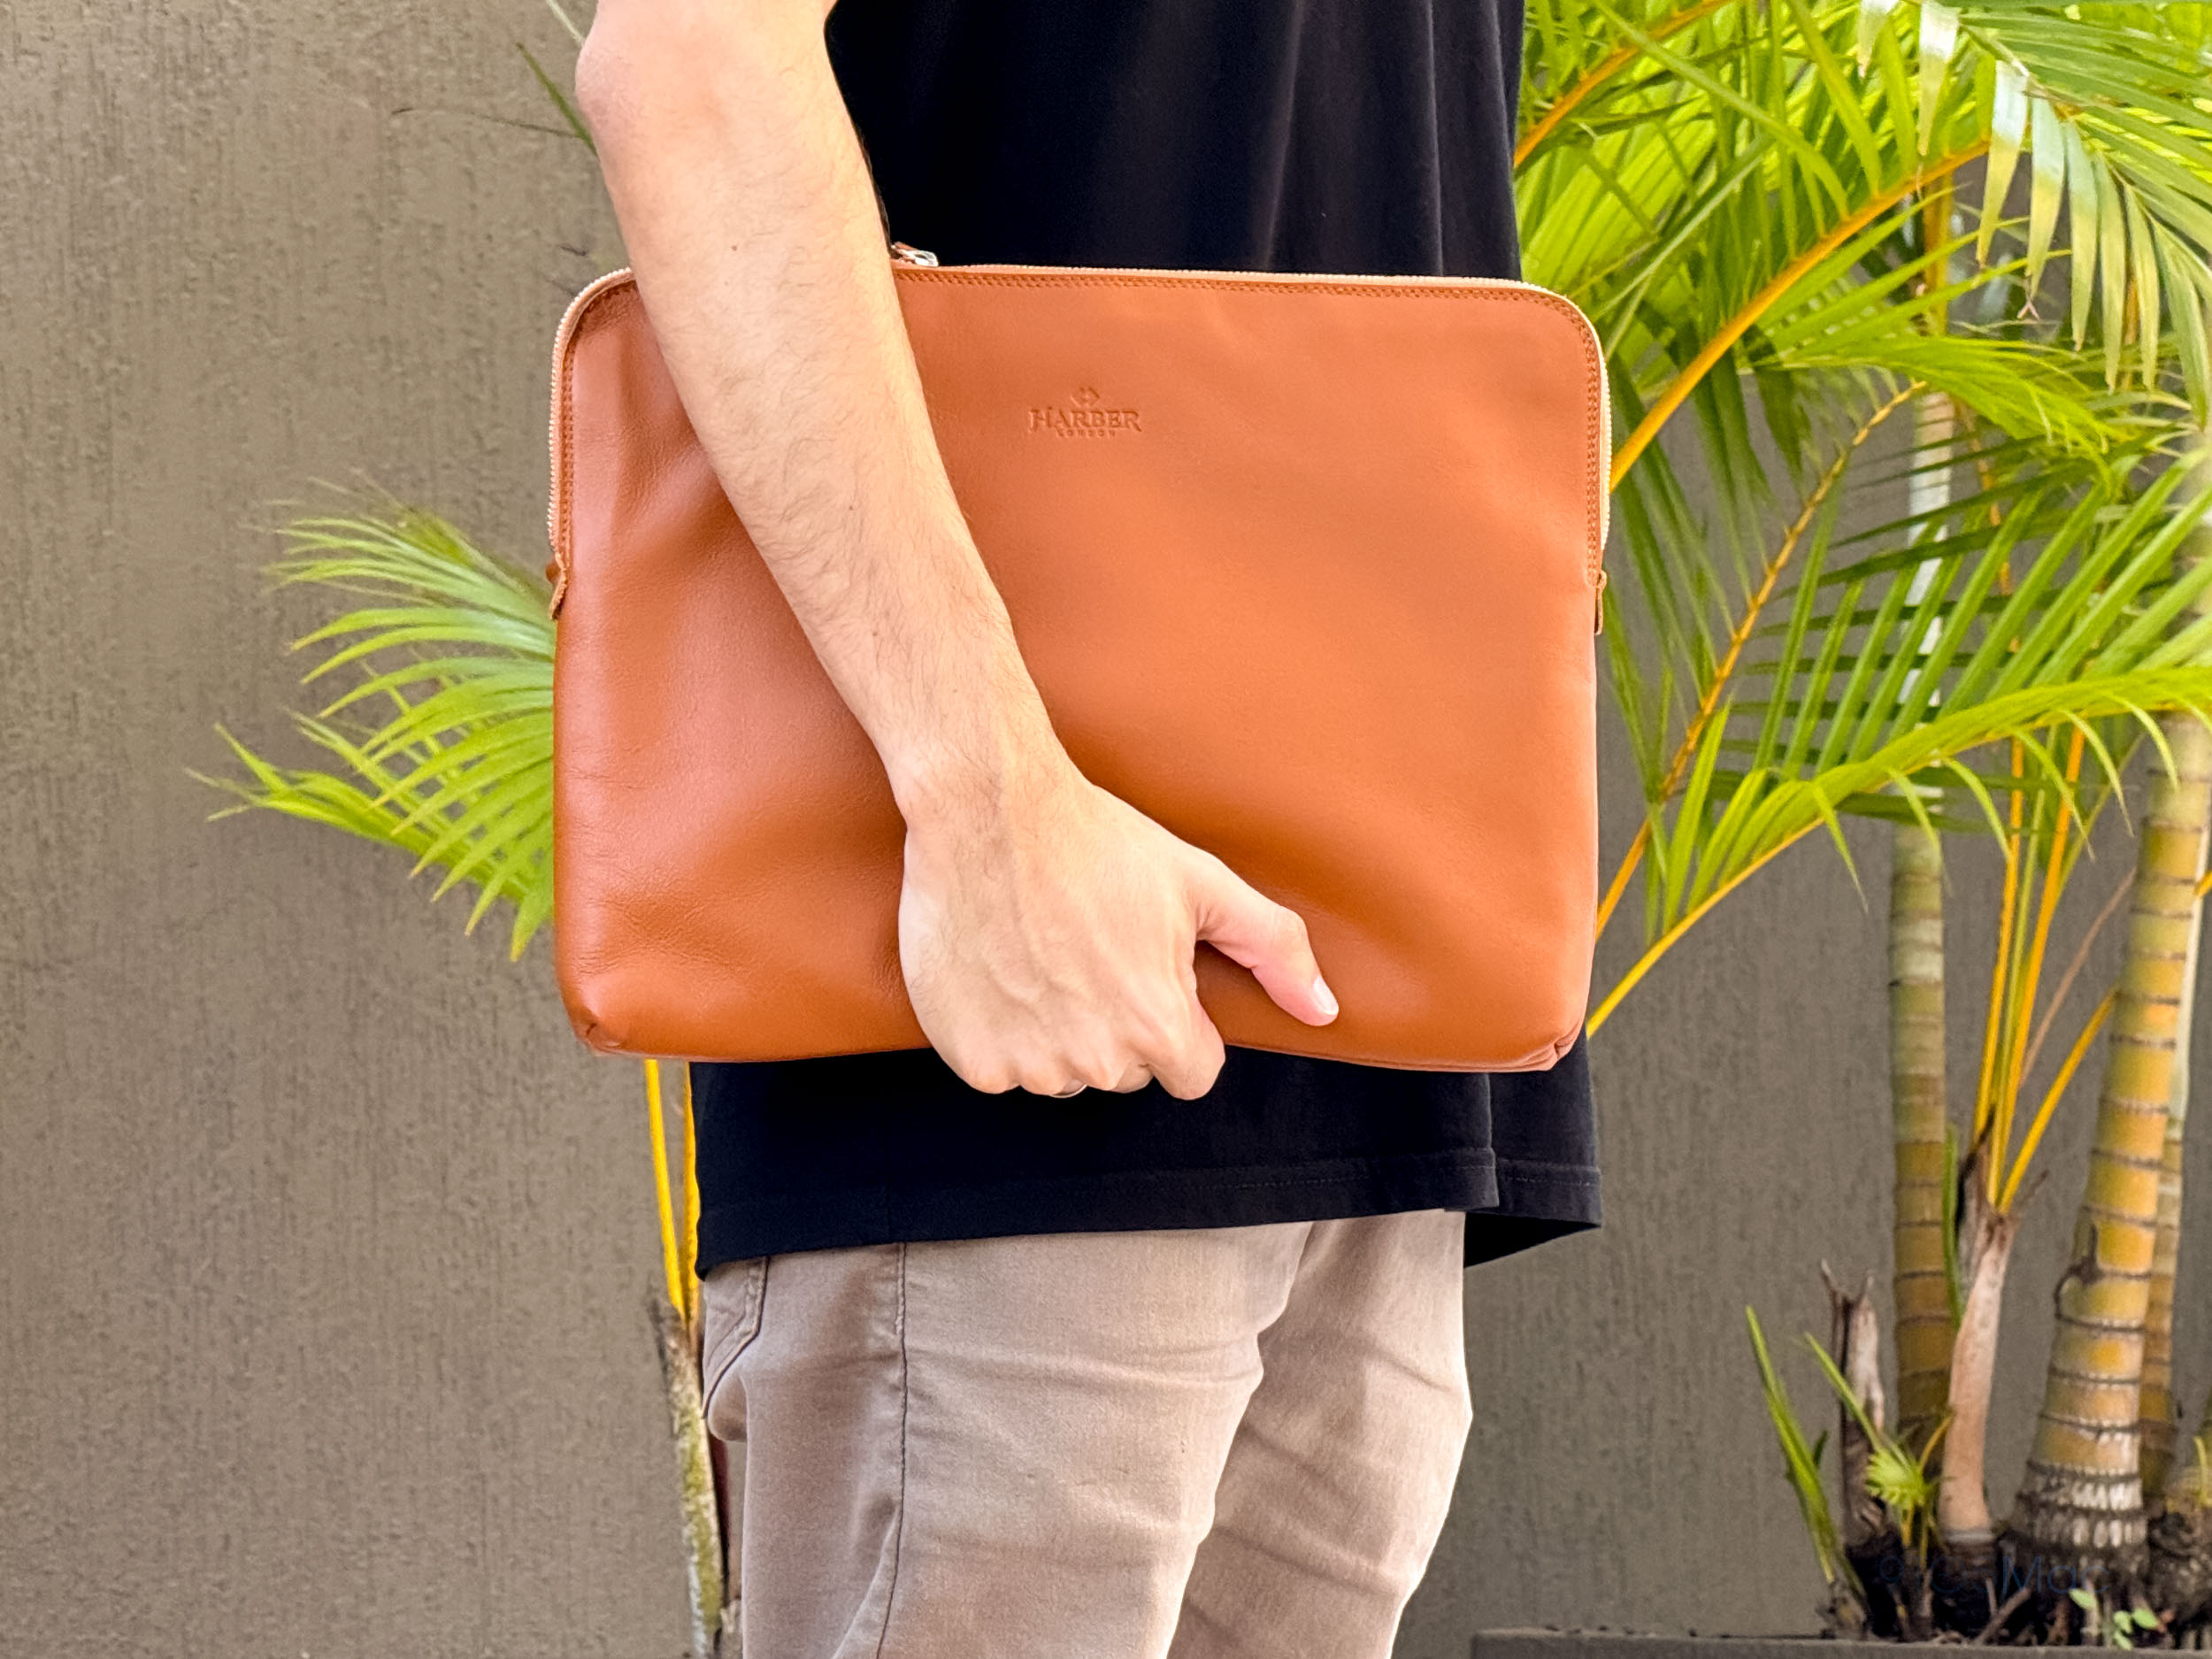 Hands-on: Carry your Mac and iPad in style with Harber London's backpacks and sleeves